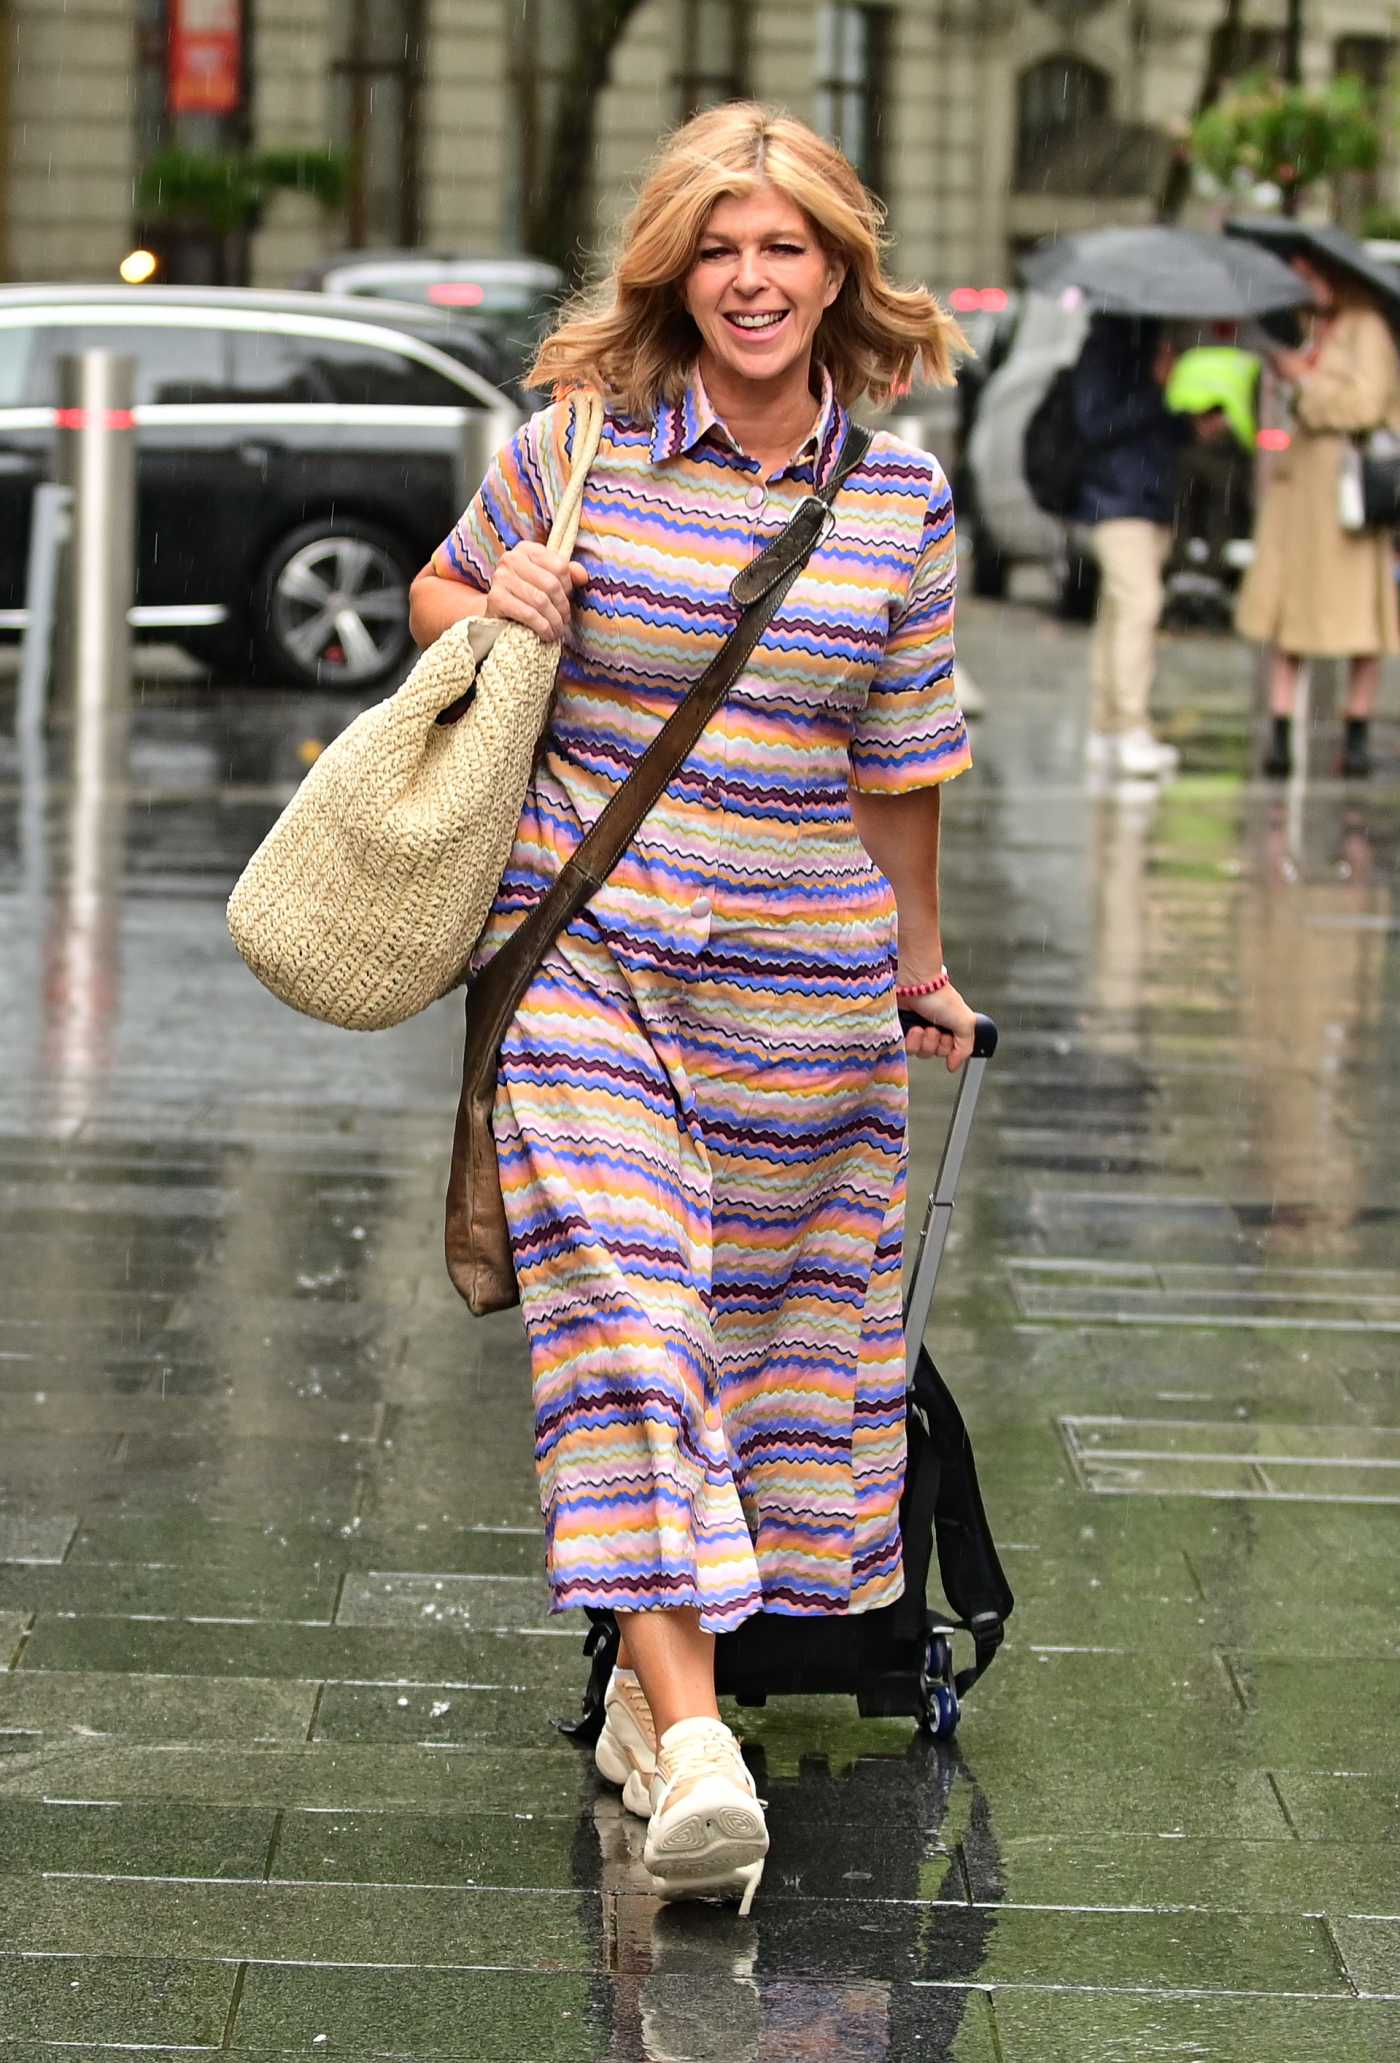 Kate Garraway in a Striped Dress Braves the Summer Rain as She Makes Her Way to the Global Radio in London 08/25/2022